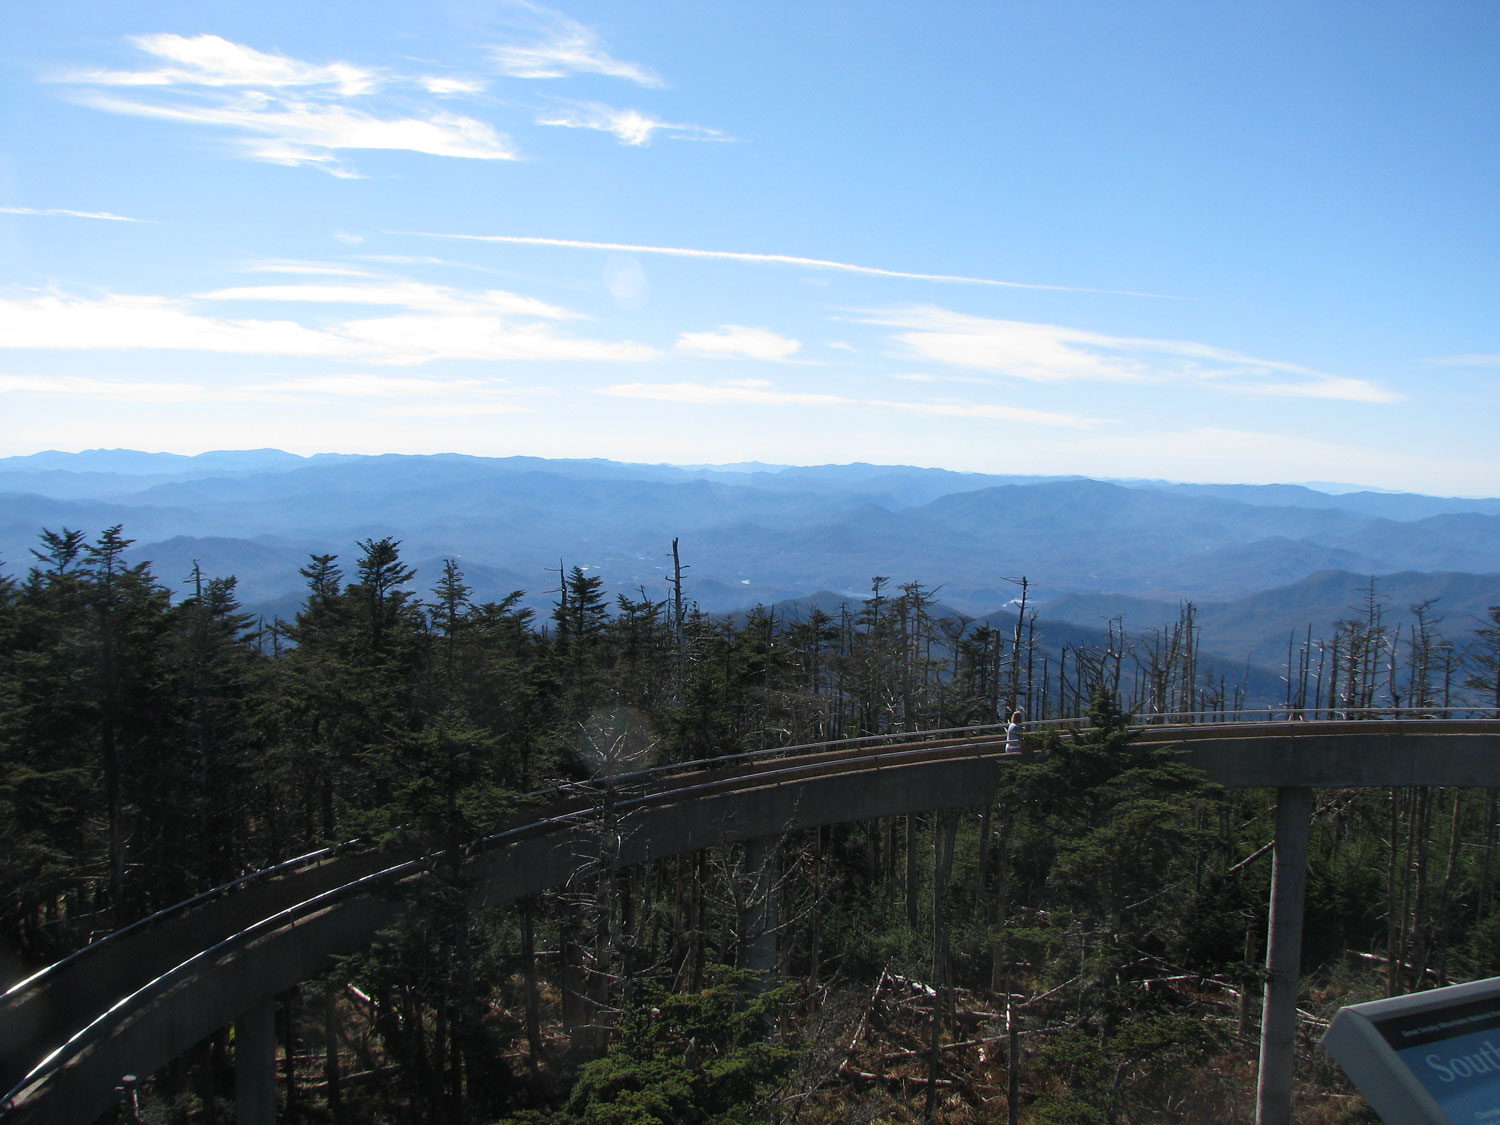 Looking south towards Brasstown Bald - the tower ramp is in the foreground